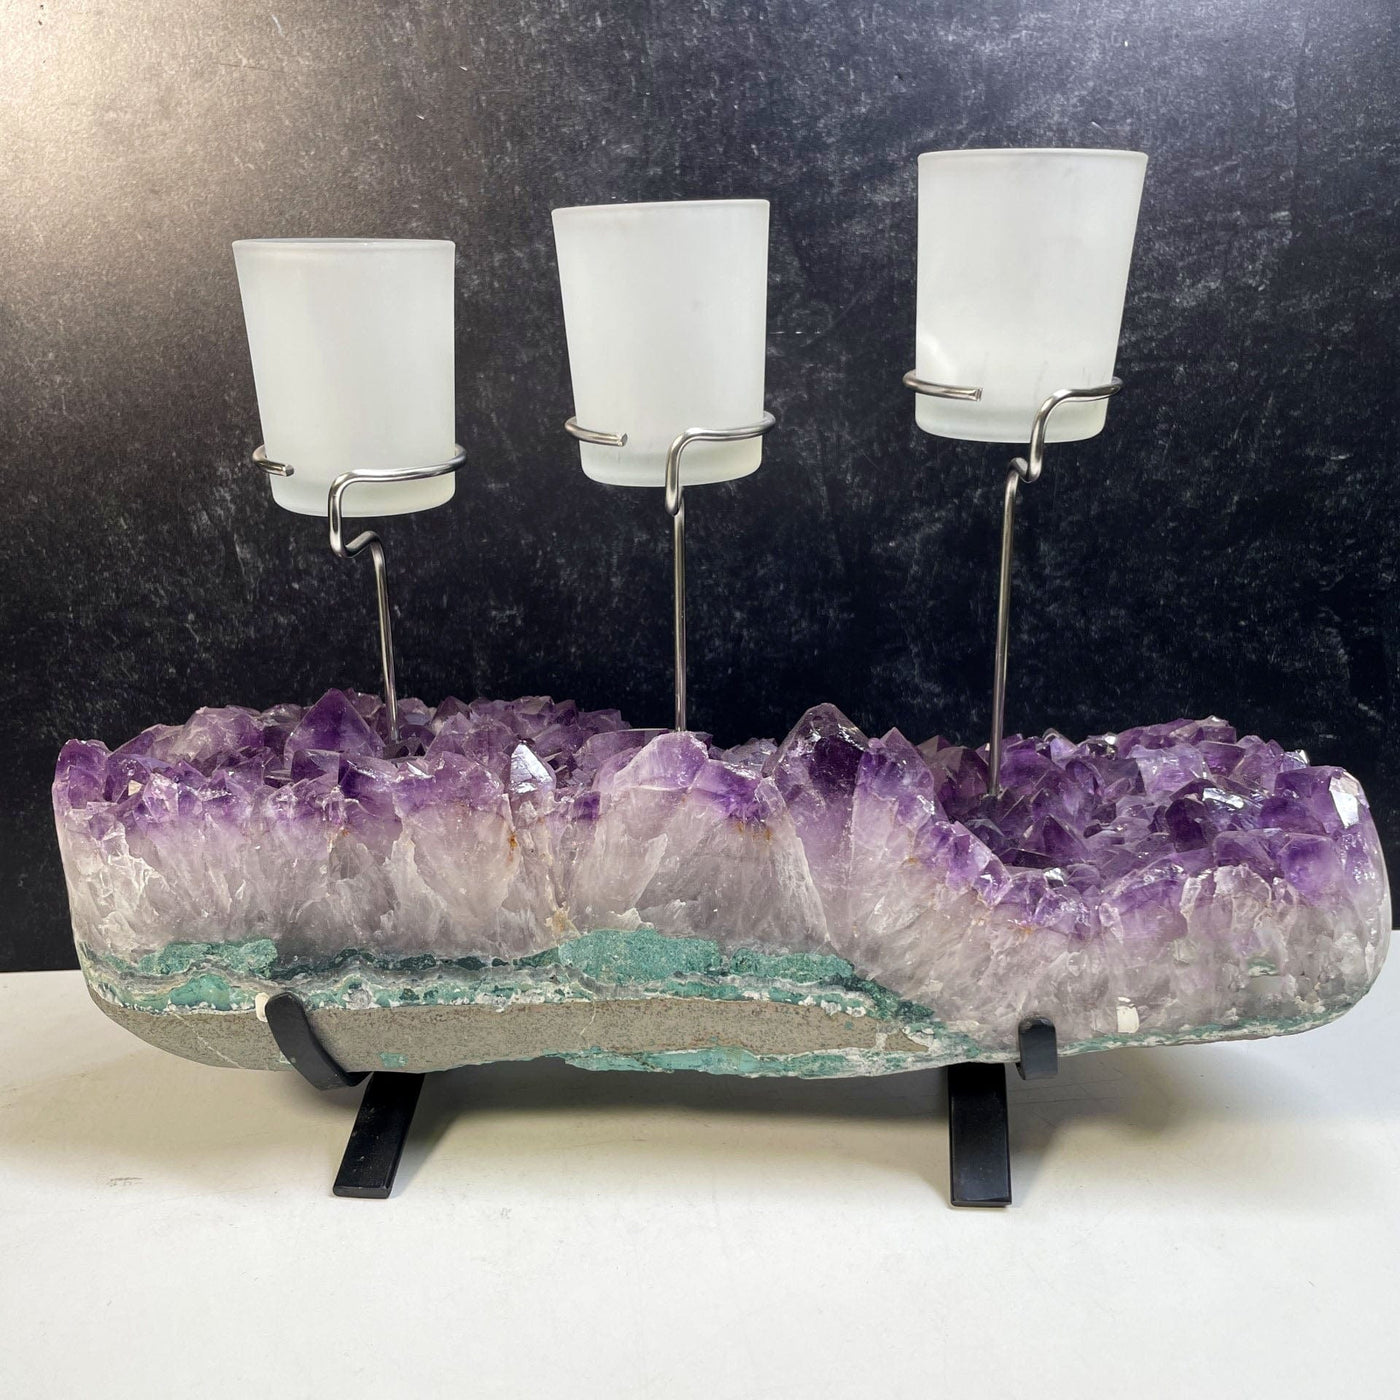 Amethyst Cluster Base with 3 Votive Candle Holders back side view